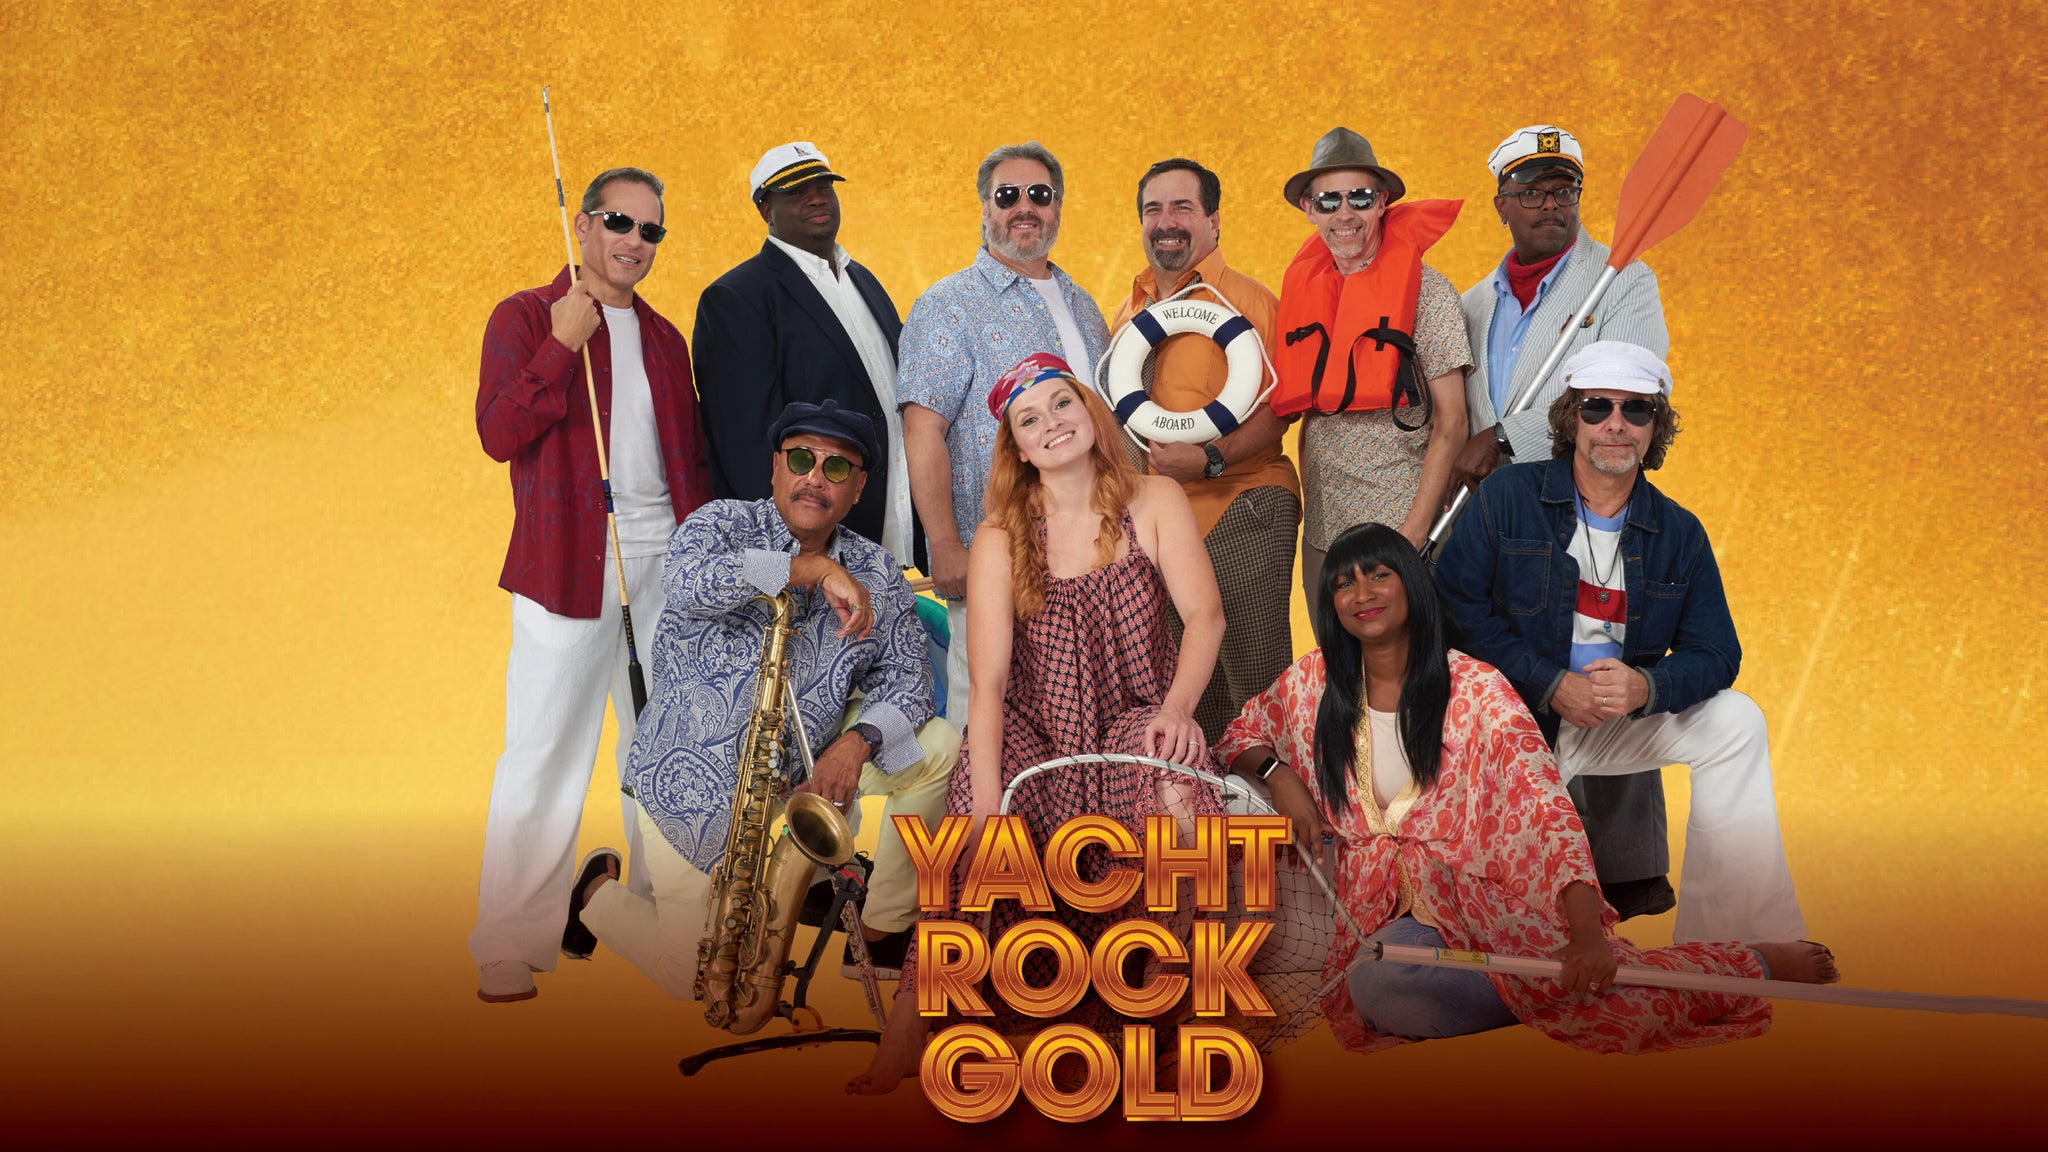 yacht rock gold reviews